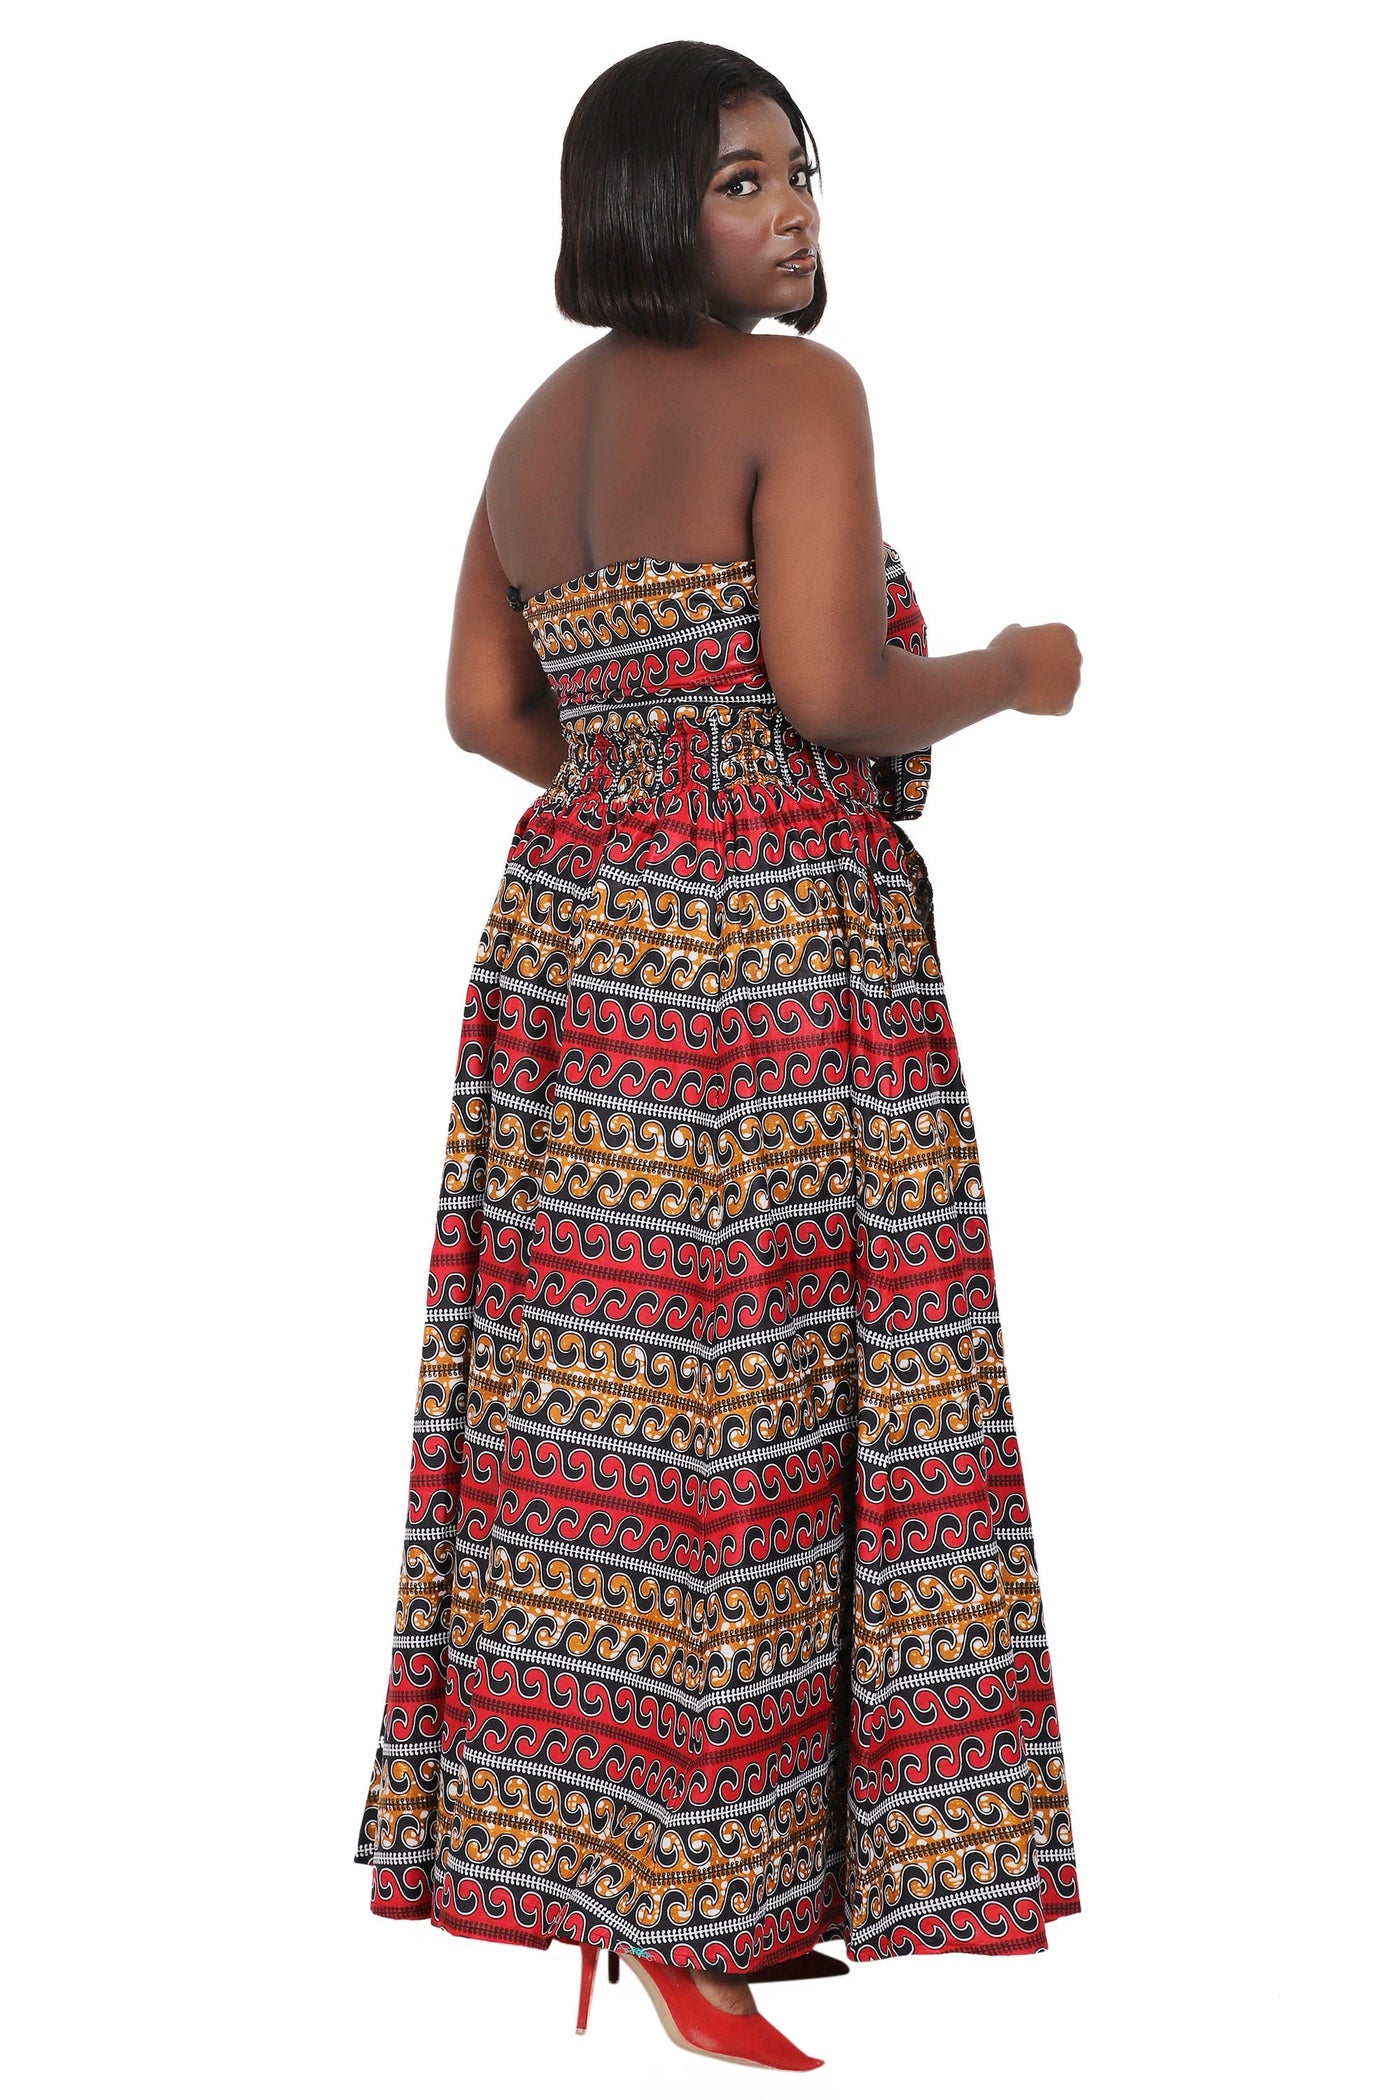 African Print Wax Print Skirt One Size Fits Most Headwrap Included Elastic Waist Pockets 16317